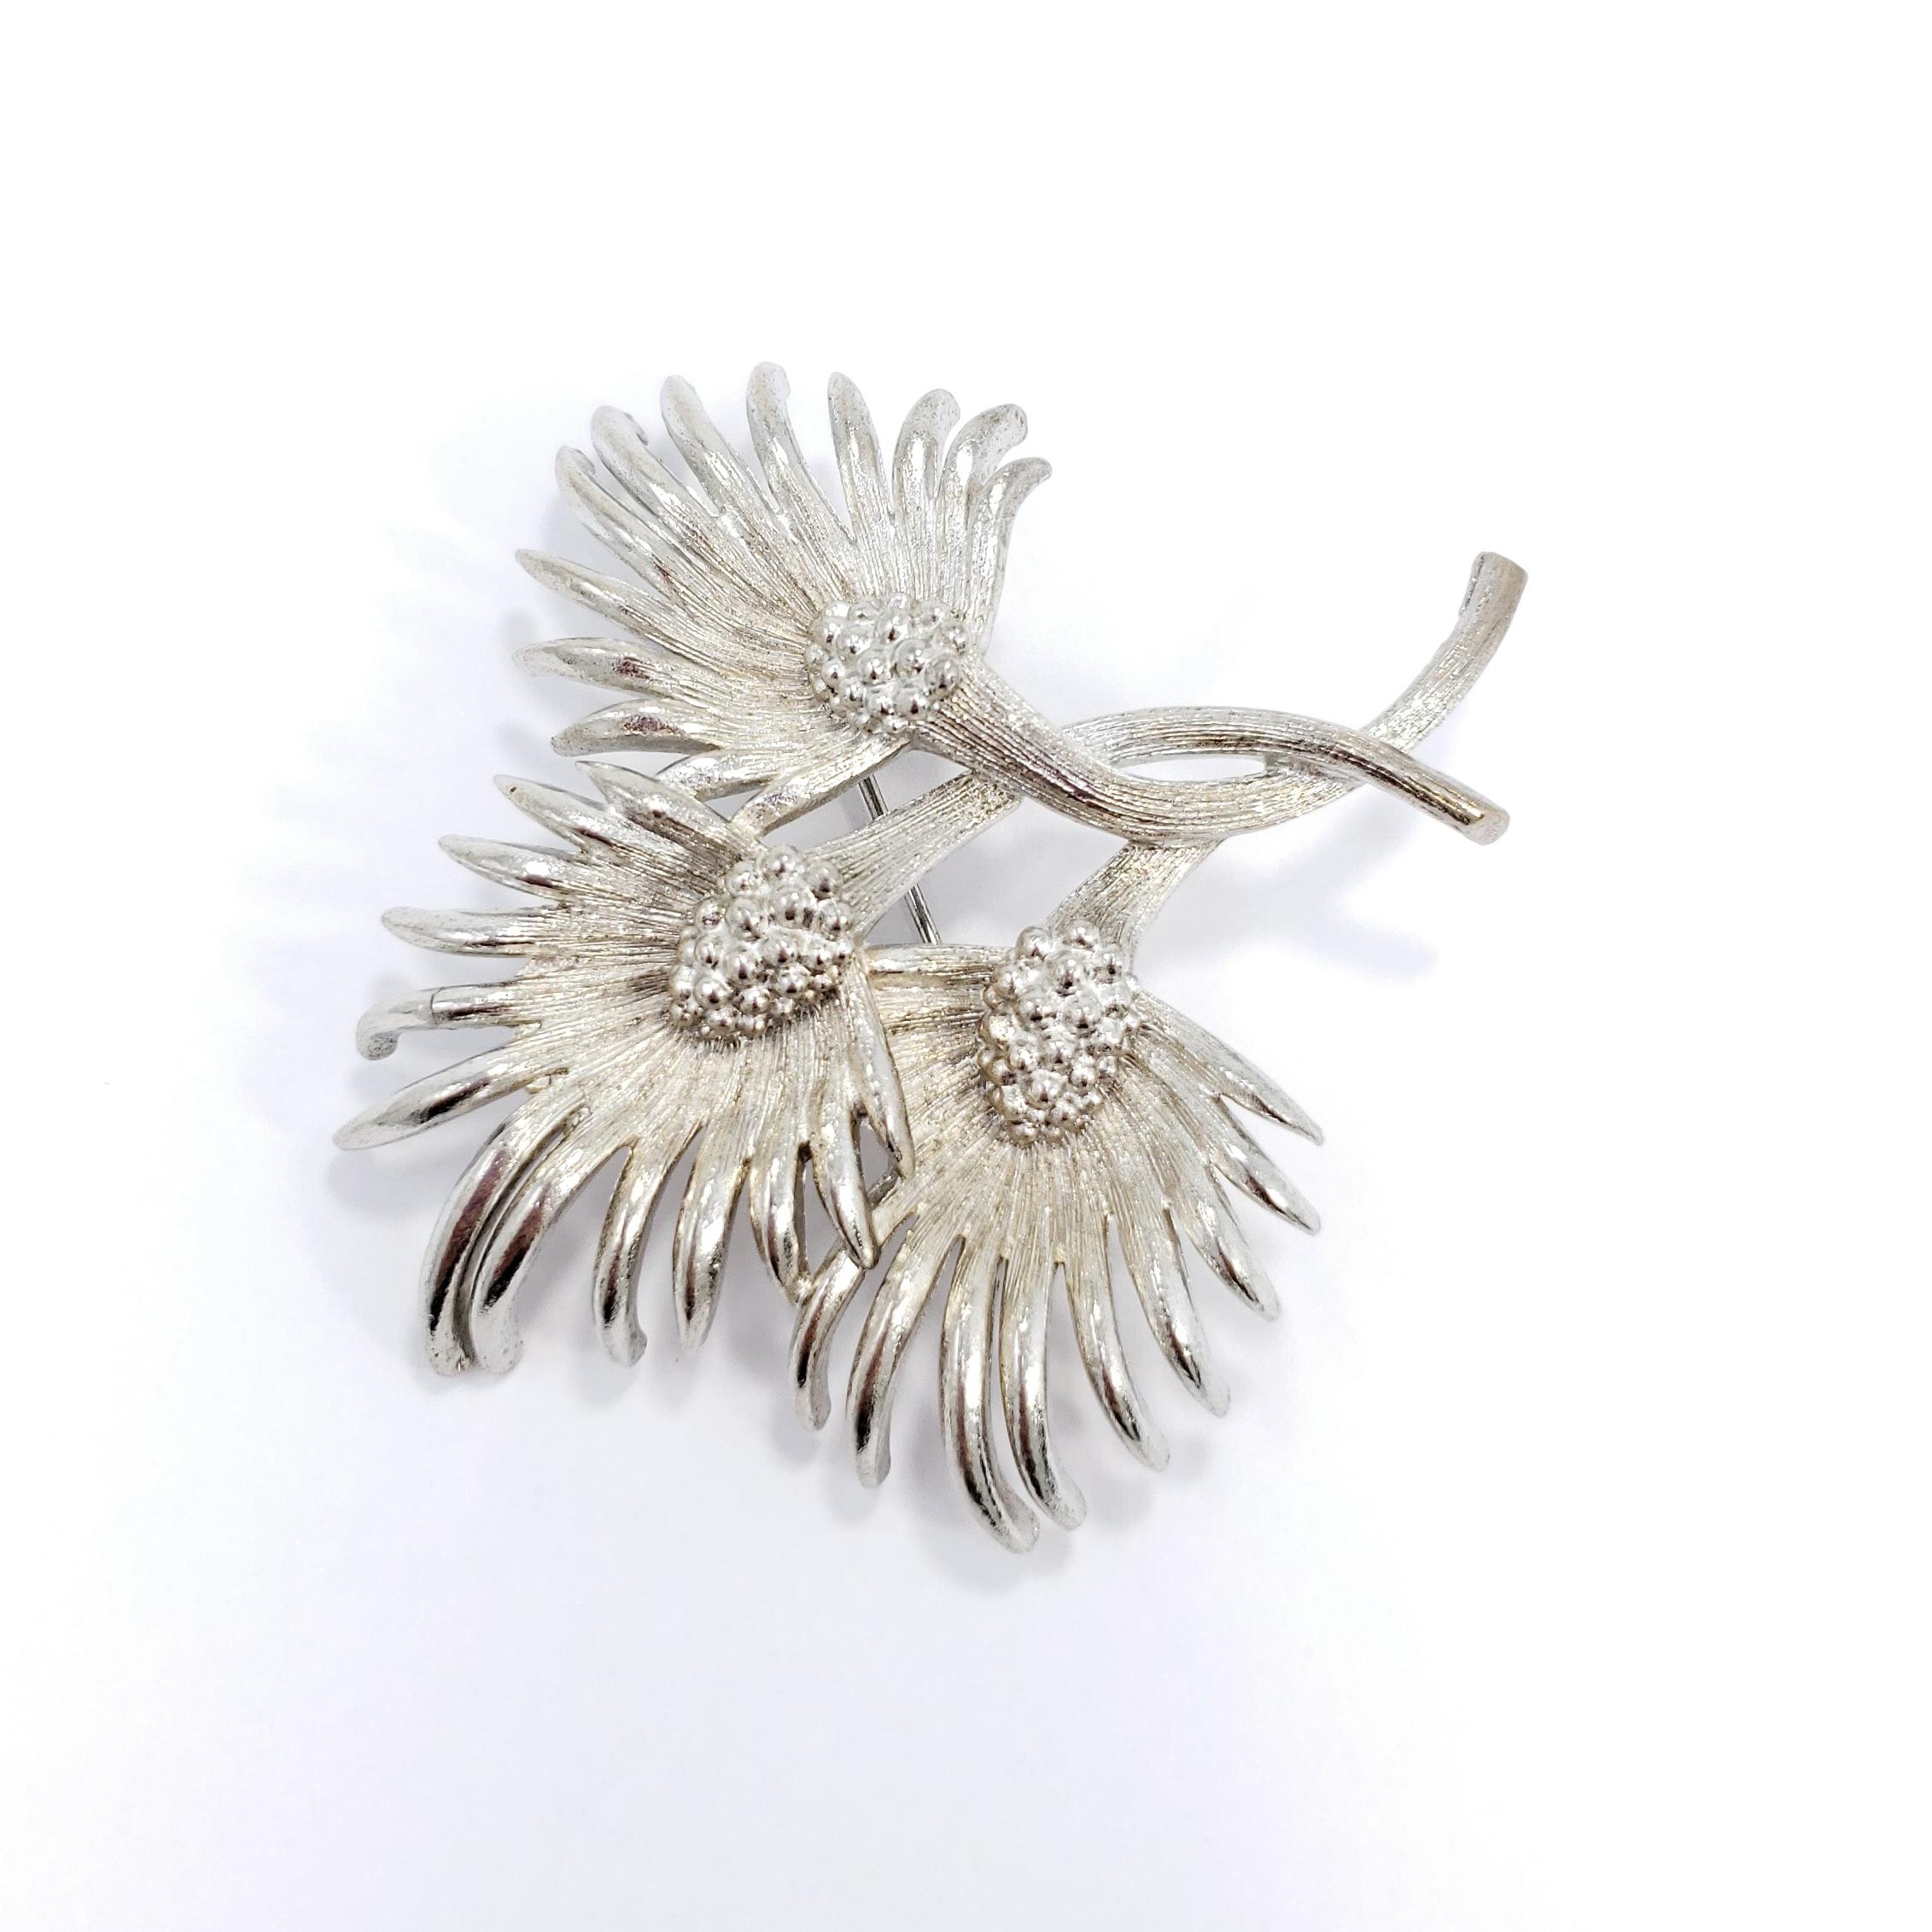 A stylish pin brooch by Lisner, featuring three flowers in silver tone.

Hallmarks: Lisner